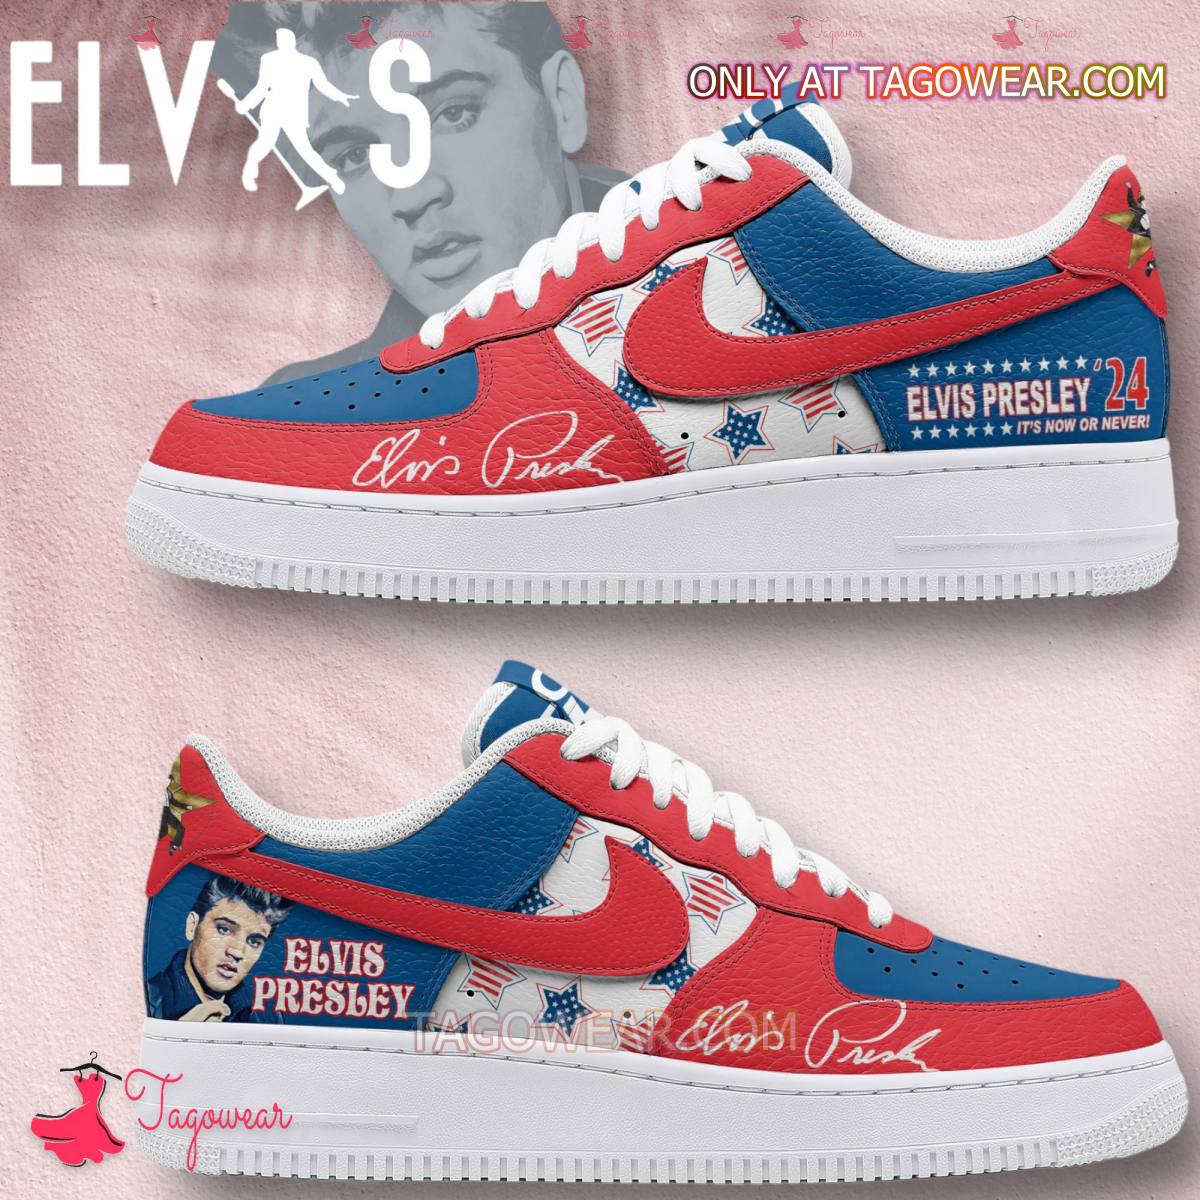 Elvis Presley '24 It's Now Or Never Happy 4th Of July Air Force Shoes